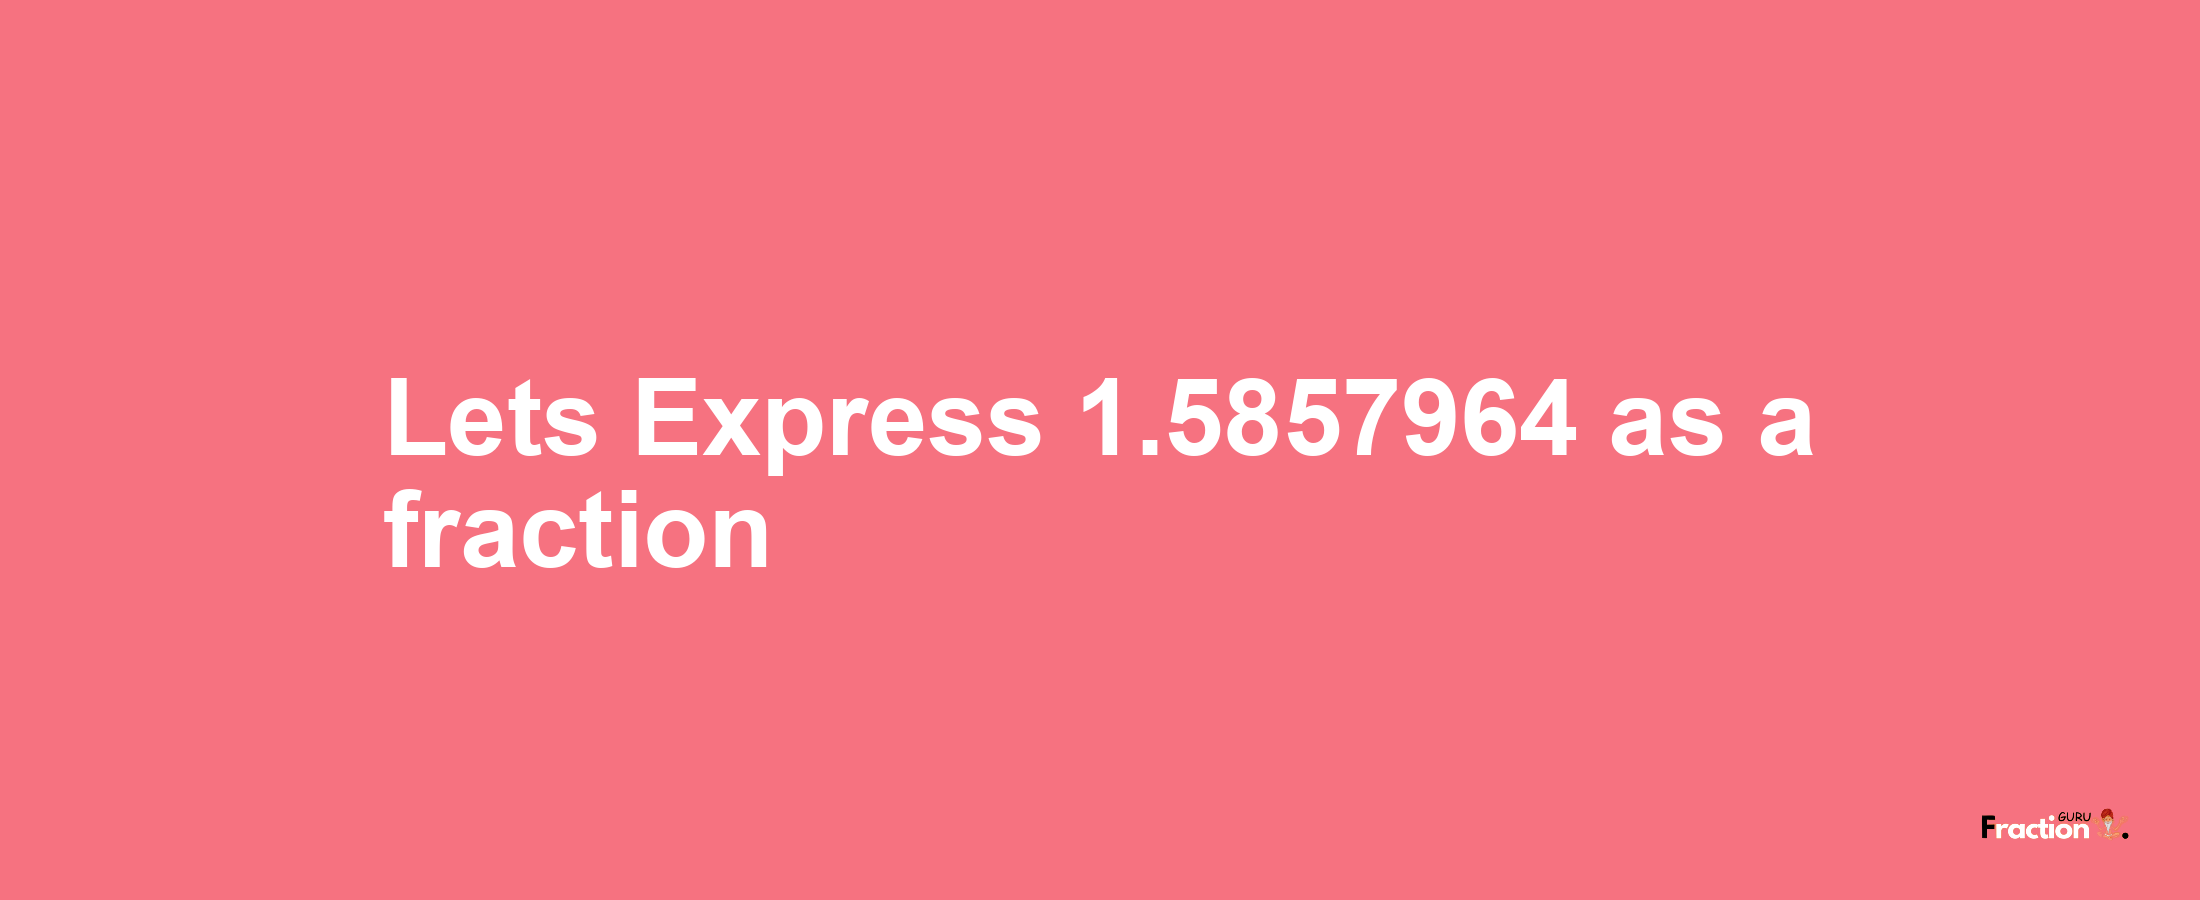 Lets Express 1.5857964 as afraction